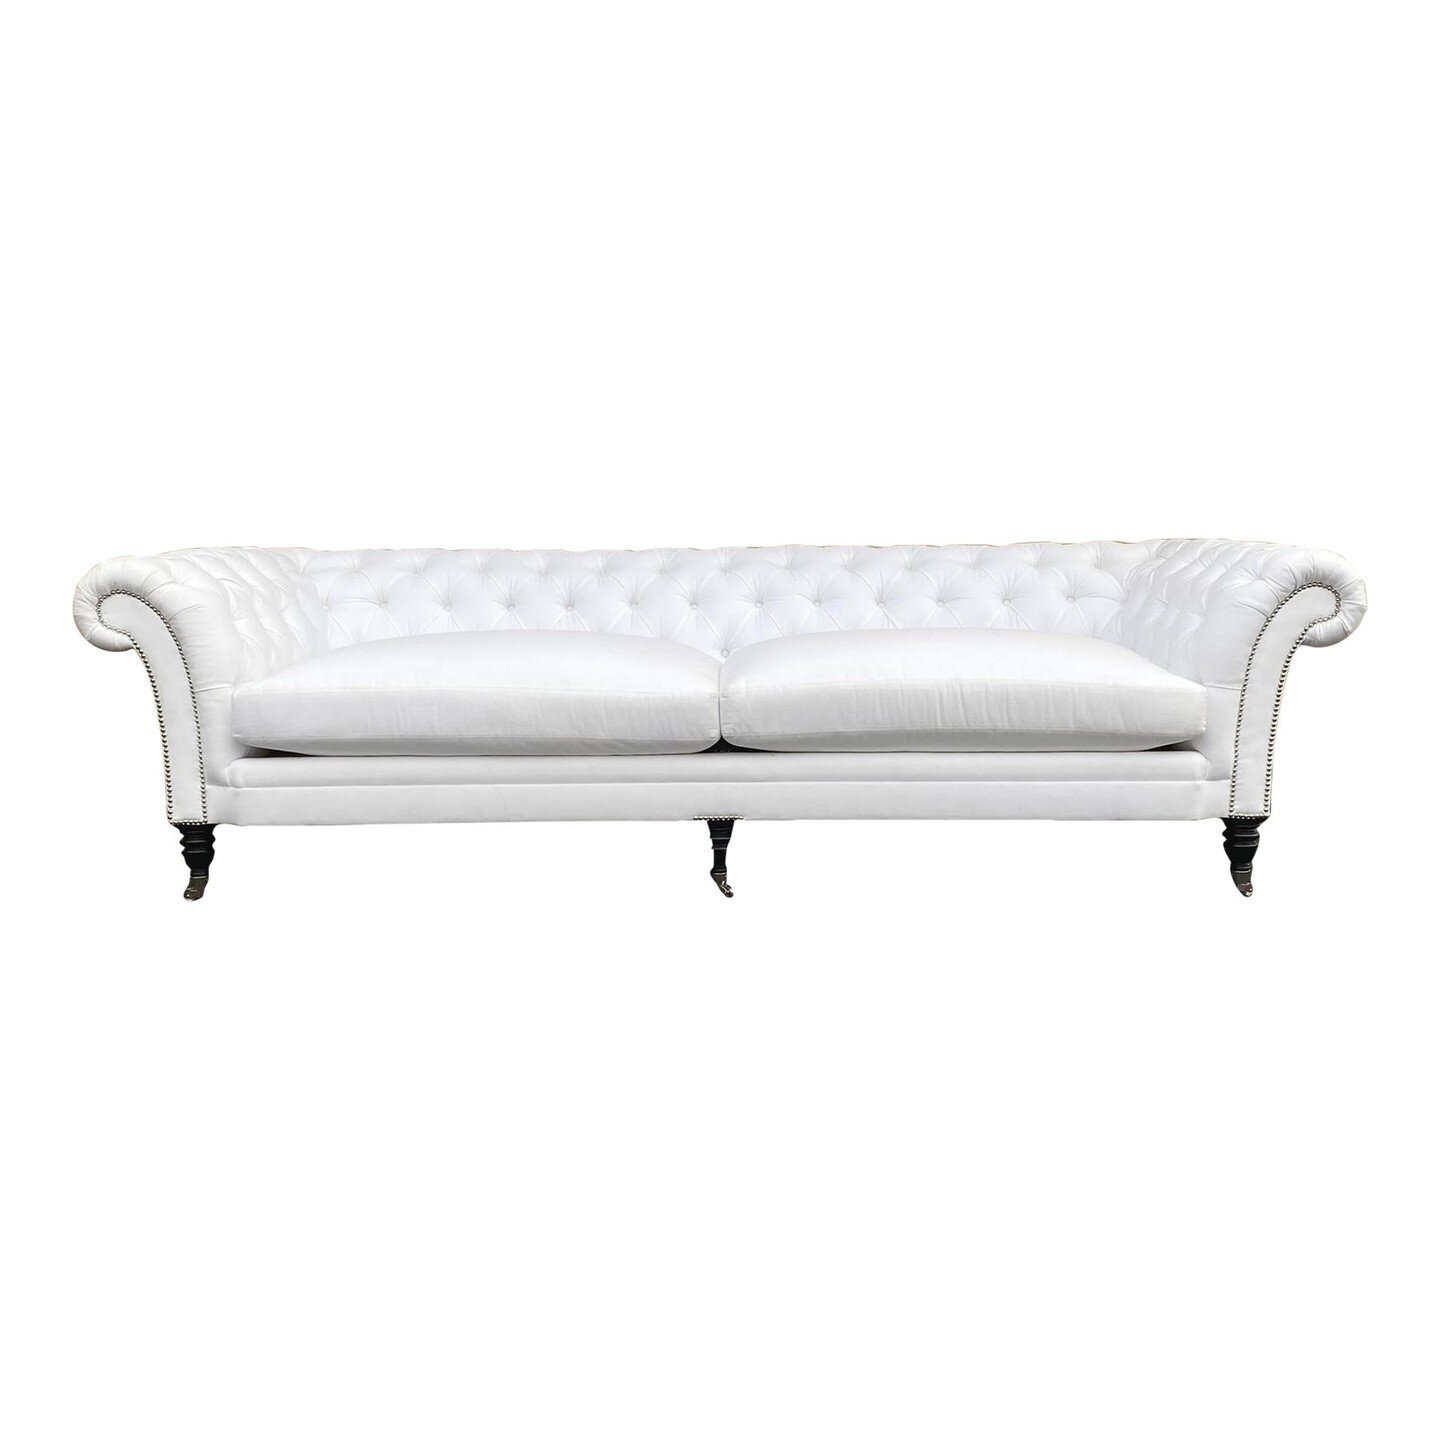 Brook Street Chesterfield Sofa in the Manner of Ralph Lauren

 Brook Street Sofa in the Manner of Ralph Lauren in a white fabric with English-style silver nailhead detail on arms and above legs. The sofa sits on carved legs with silver casters. The s